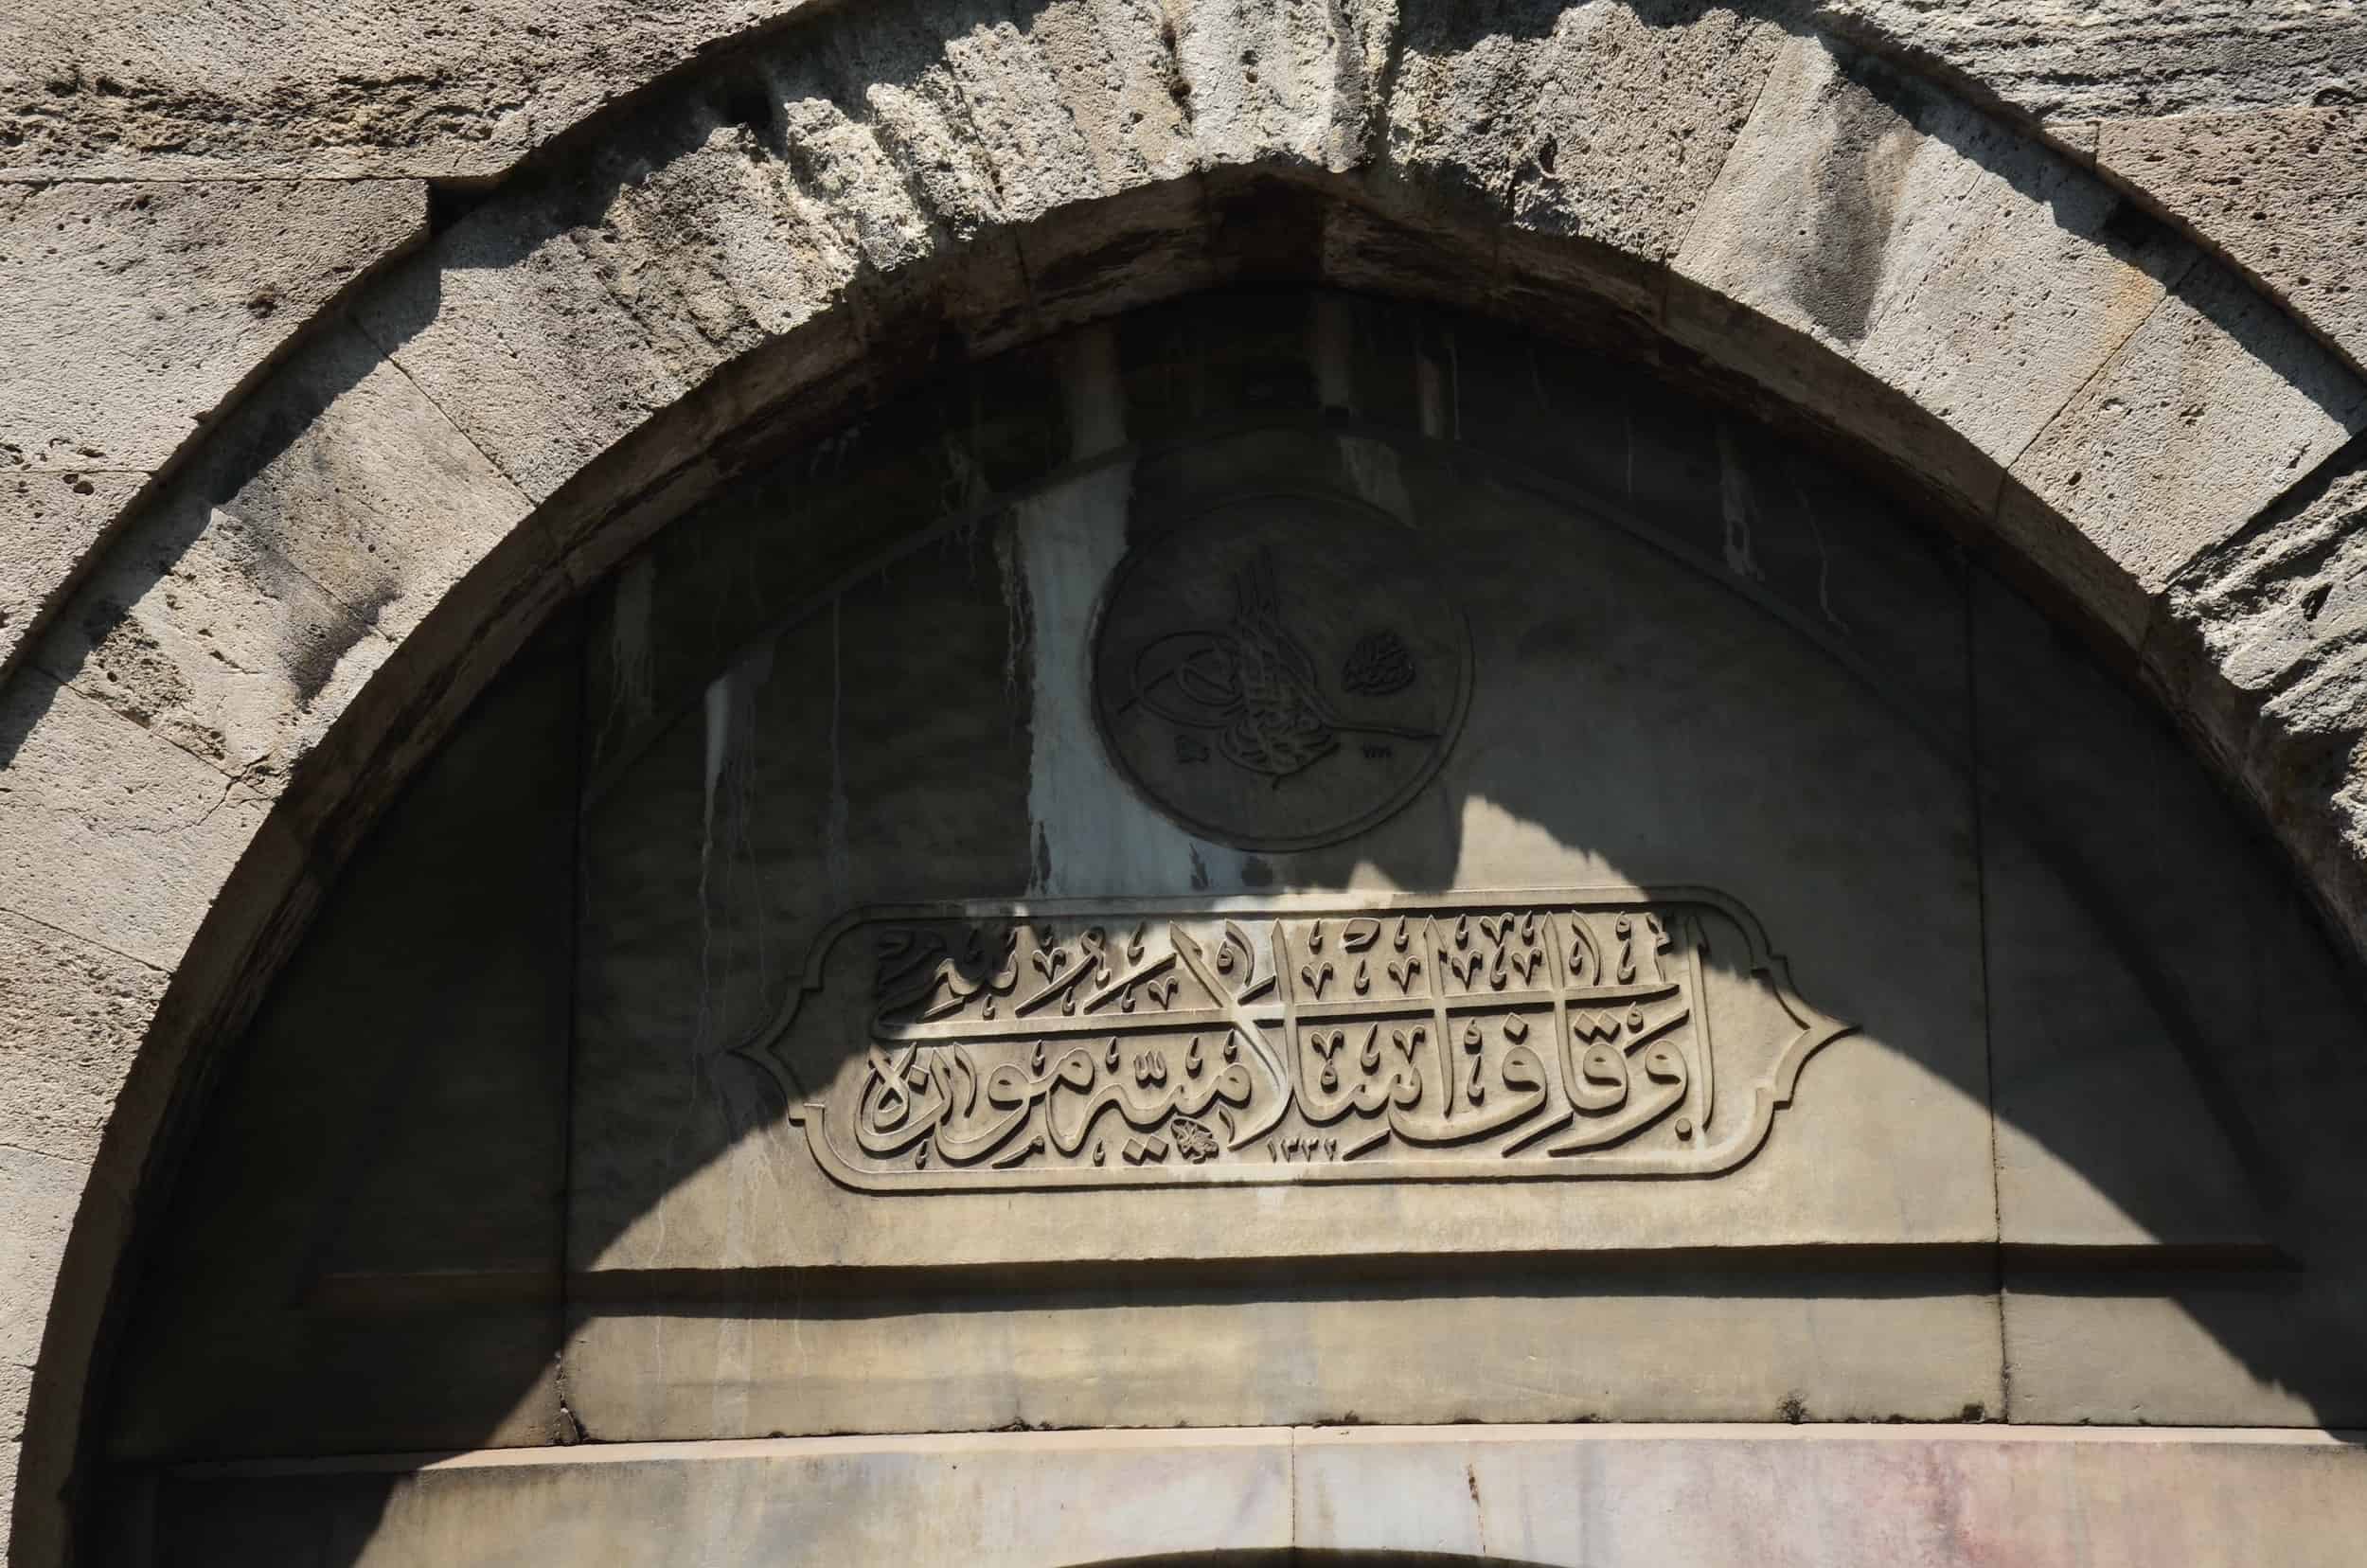 Inscription above the entrance to the soup kitchen